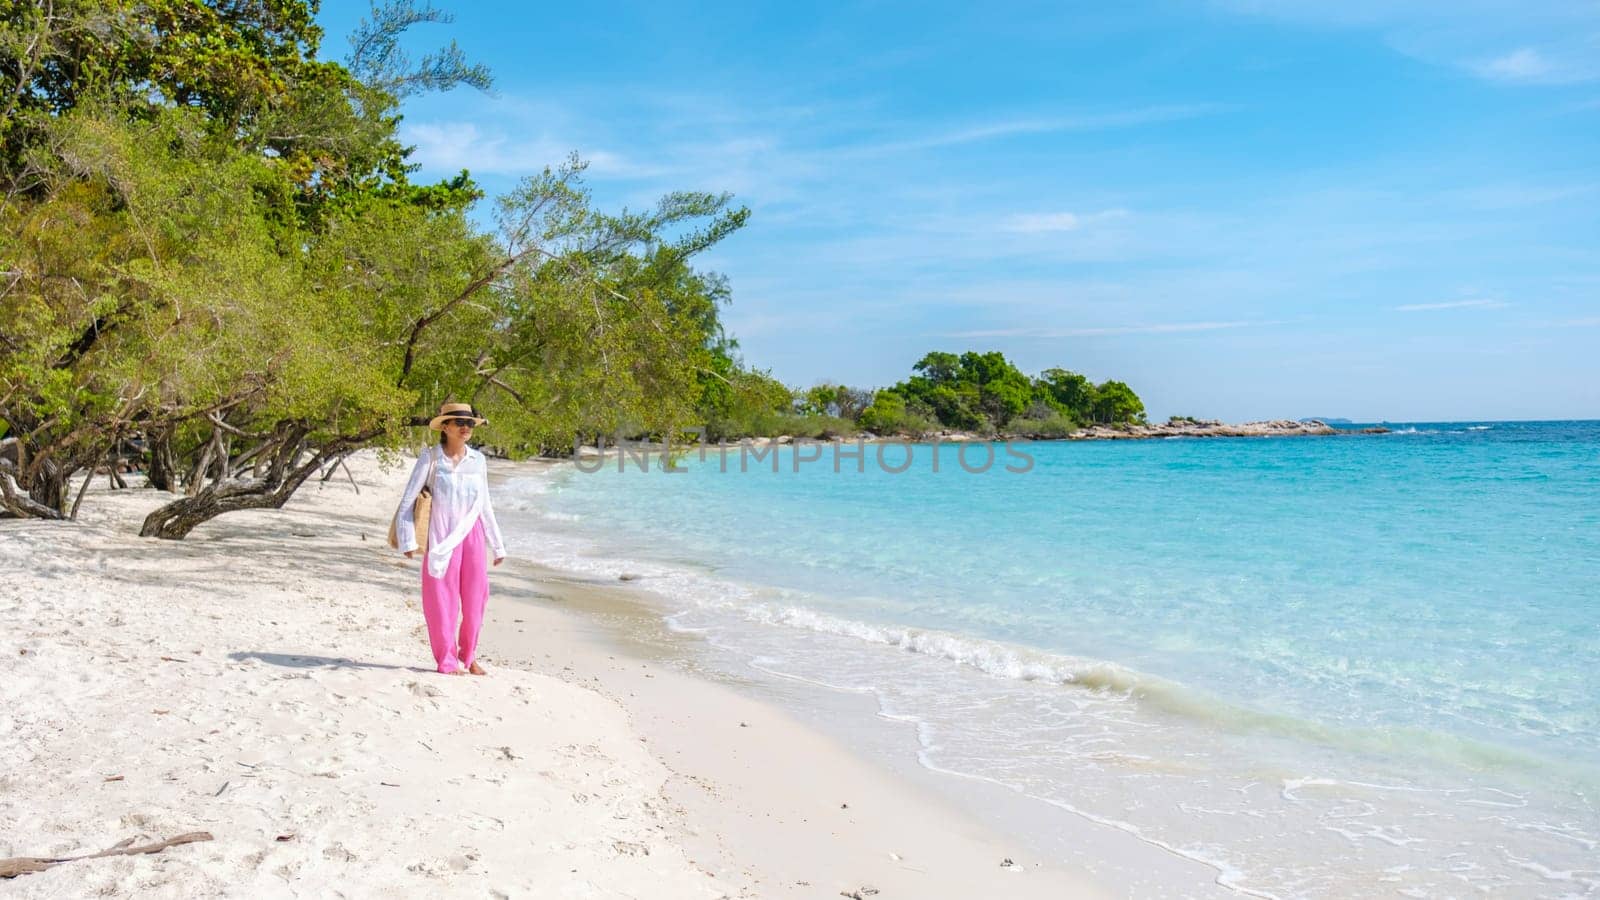 Asian Thai woman walking on the beach of Koh Samet Island Rayong Thailand, the white tropical beach of Samed Island with a turqouse colored ocean